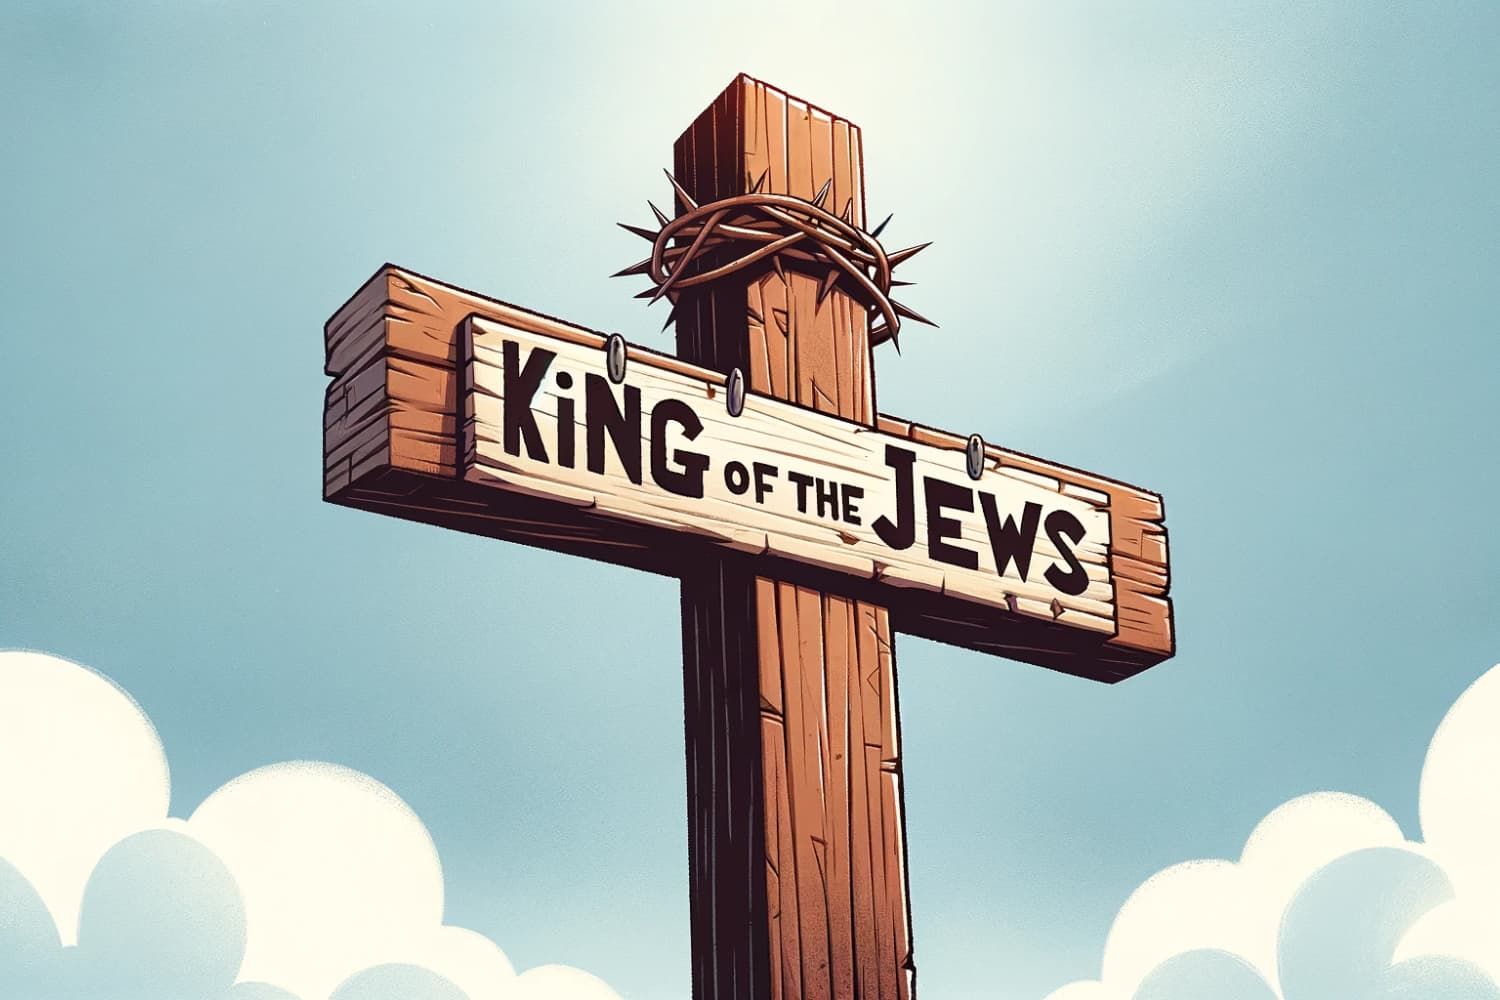 Lesson%20-%20NT%20Easter%2006%20-%20Jesus%20king%20of%20the%20Jews-1a7fec3c Mark